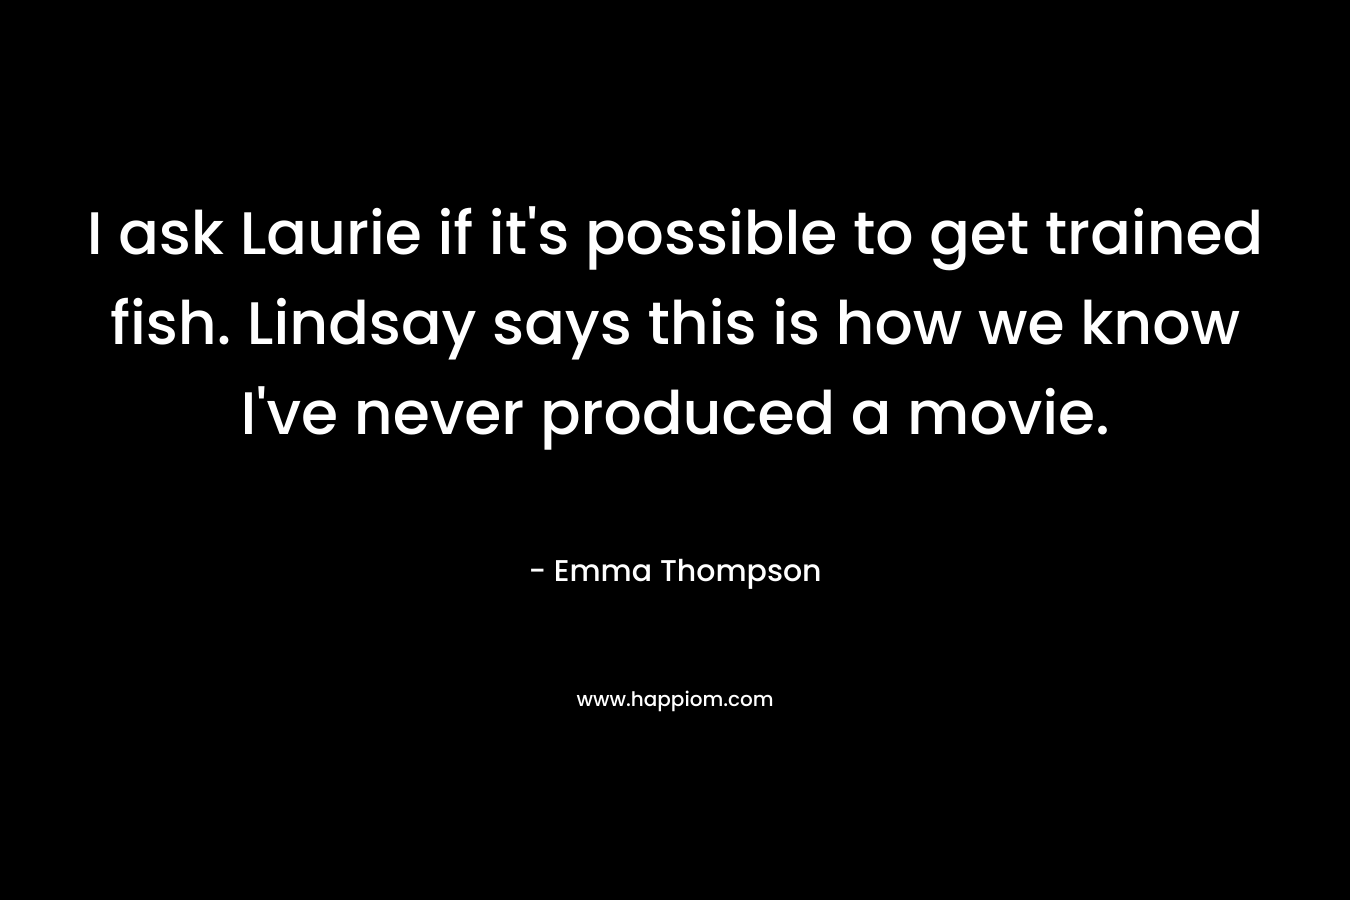 I ask Laurie if it’s possible to get trained fish. Lindsay says this is how we know I’ve never produced a movie. – Emma Thompson